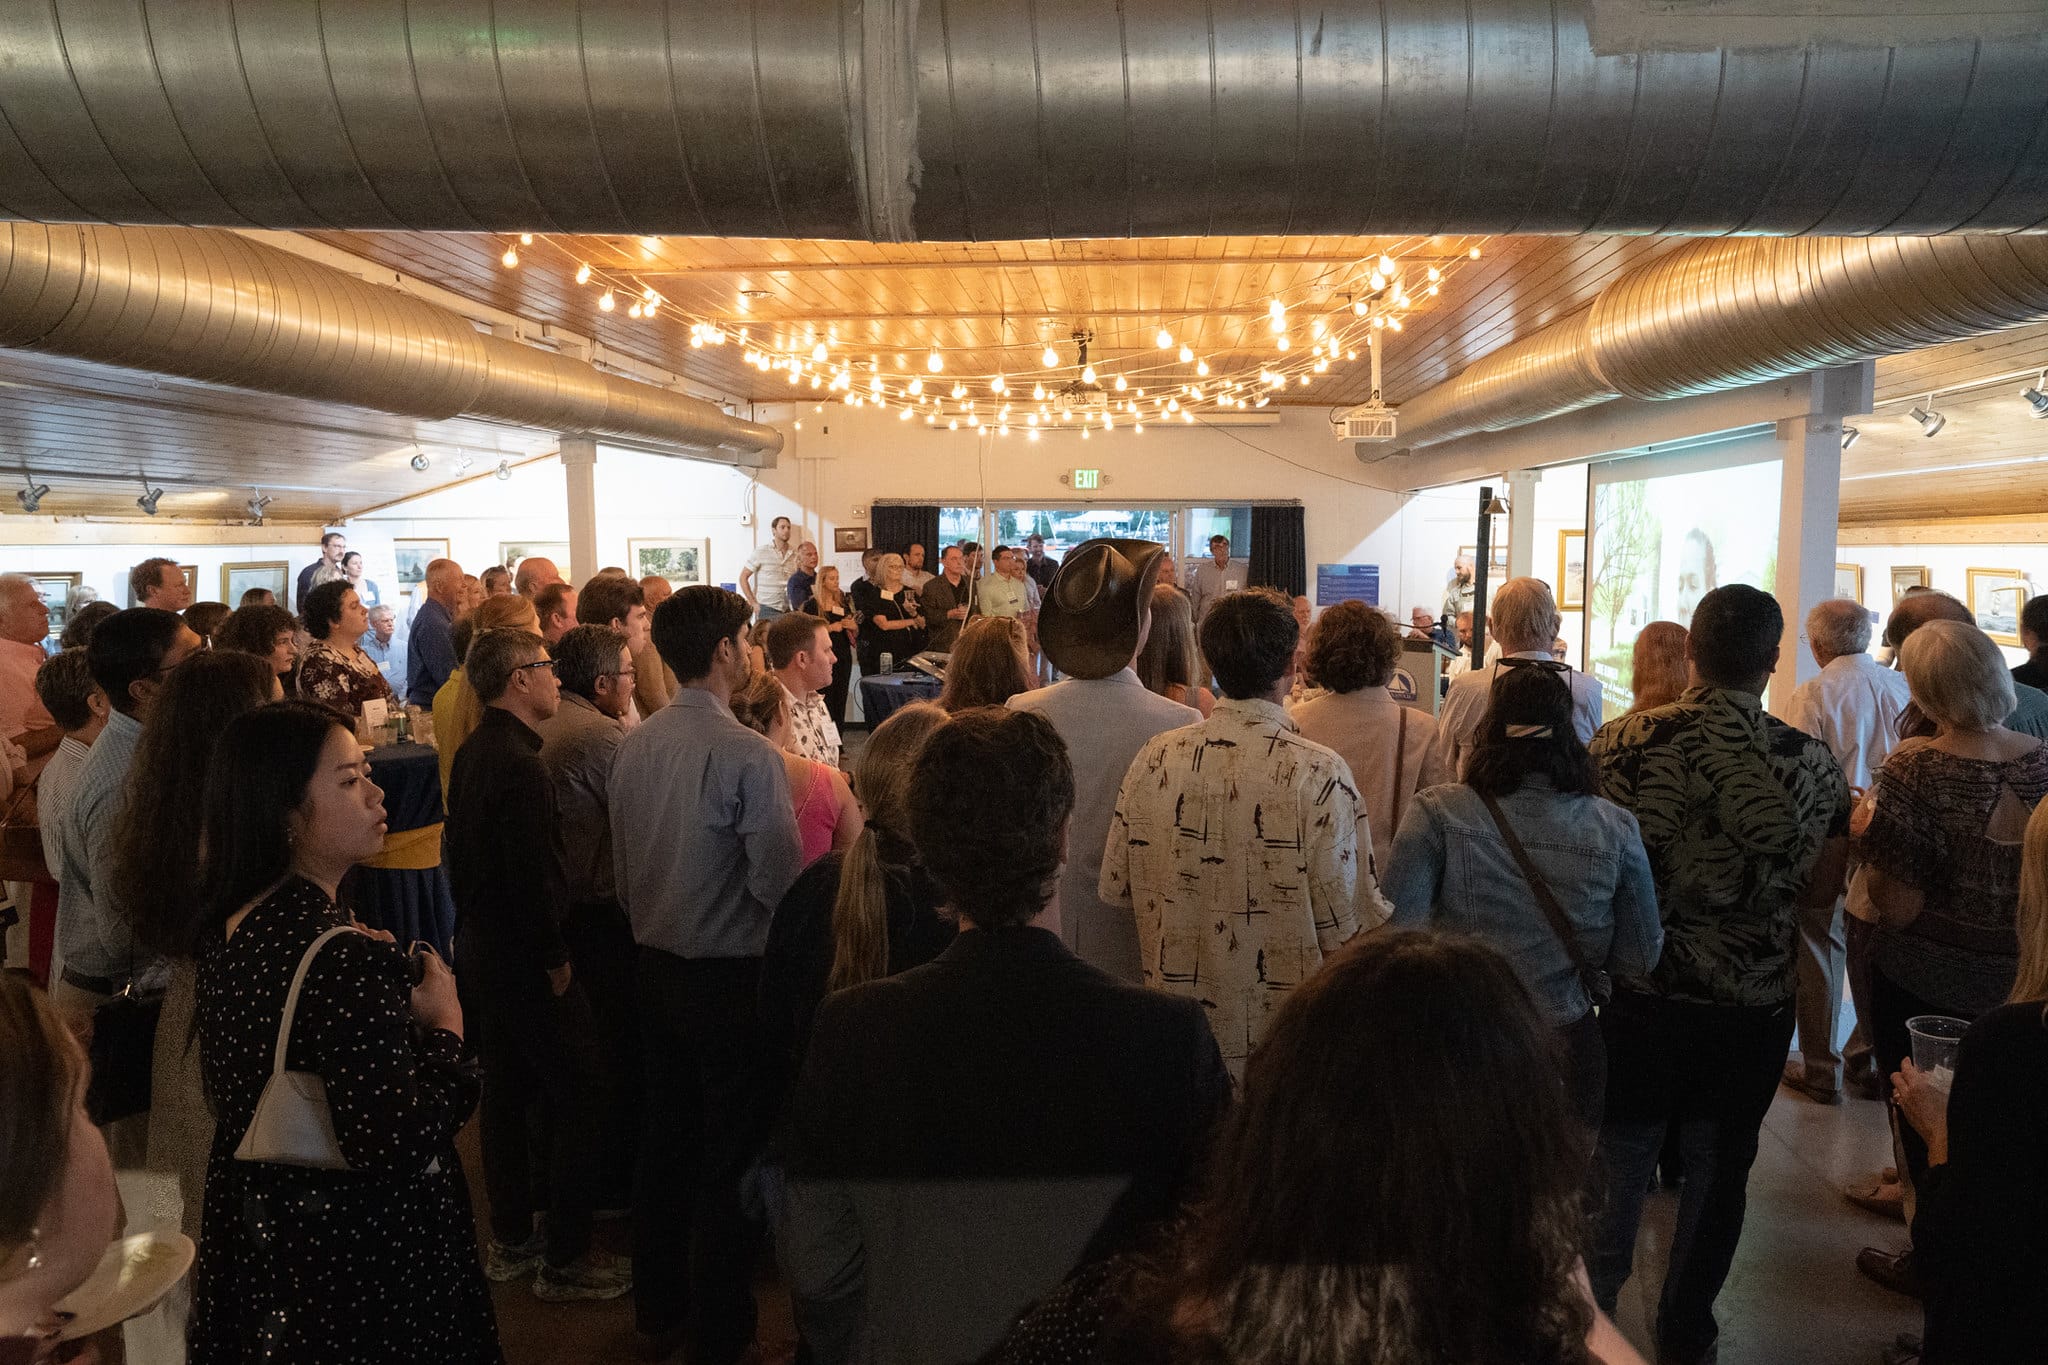 A large group of people standing under bistro lights and gathering around a large screen showing the Alliance's 2023 Impact Video at the Taste event.